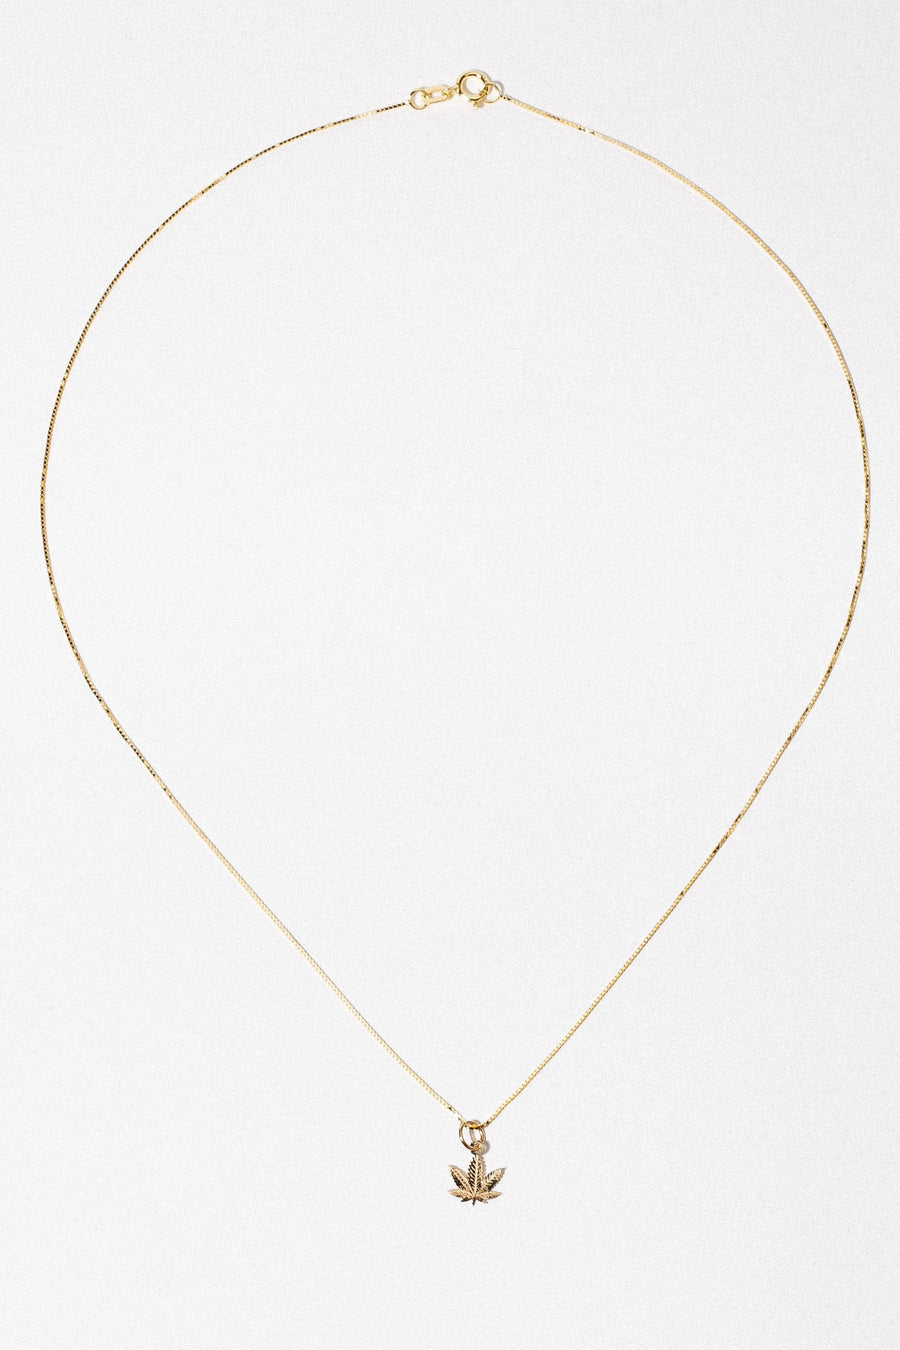 Stuller Jewelry Gold / 18 Inches 14k Kush Necklace